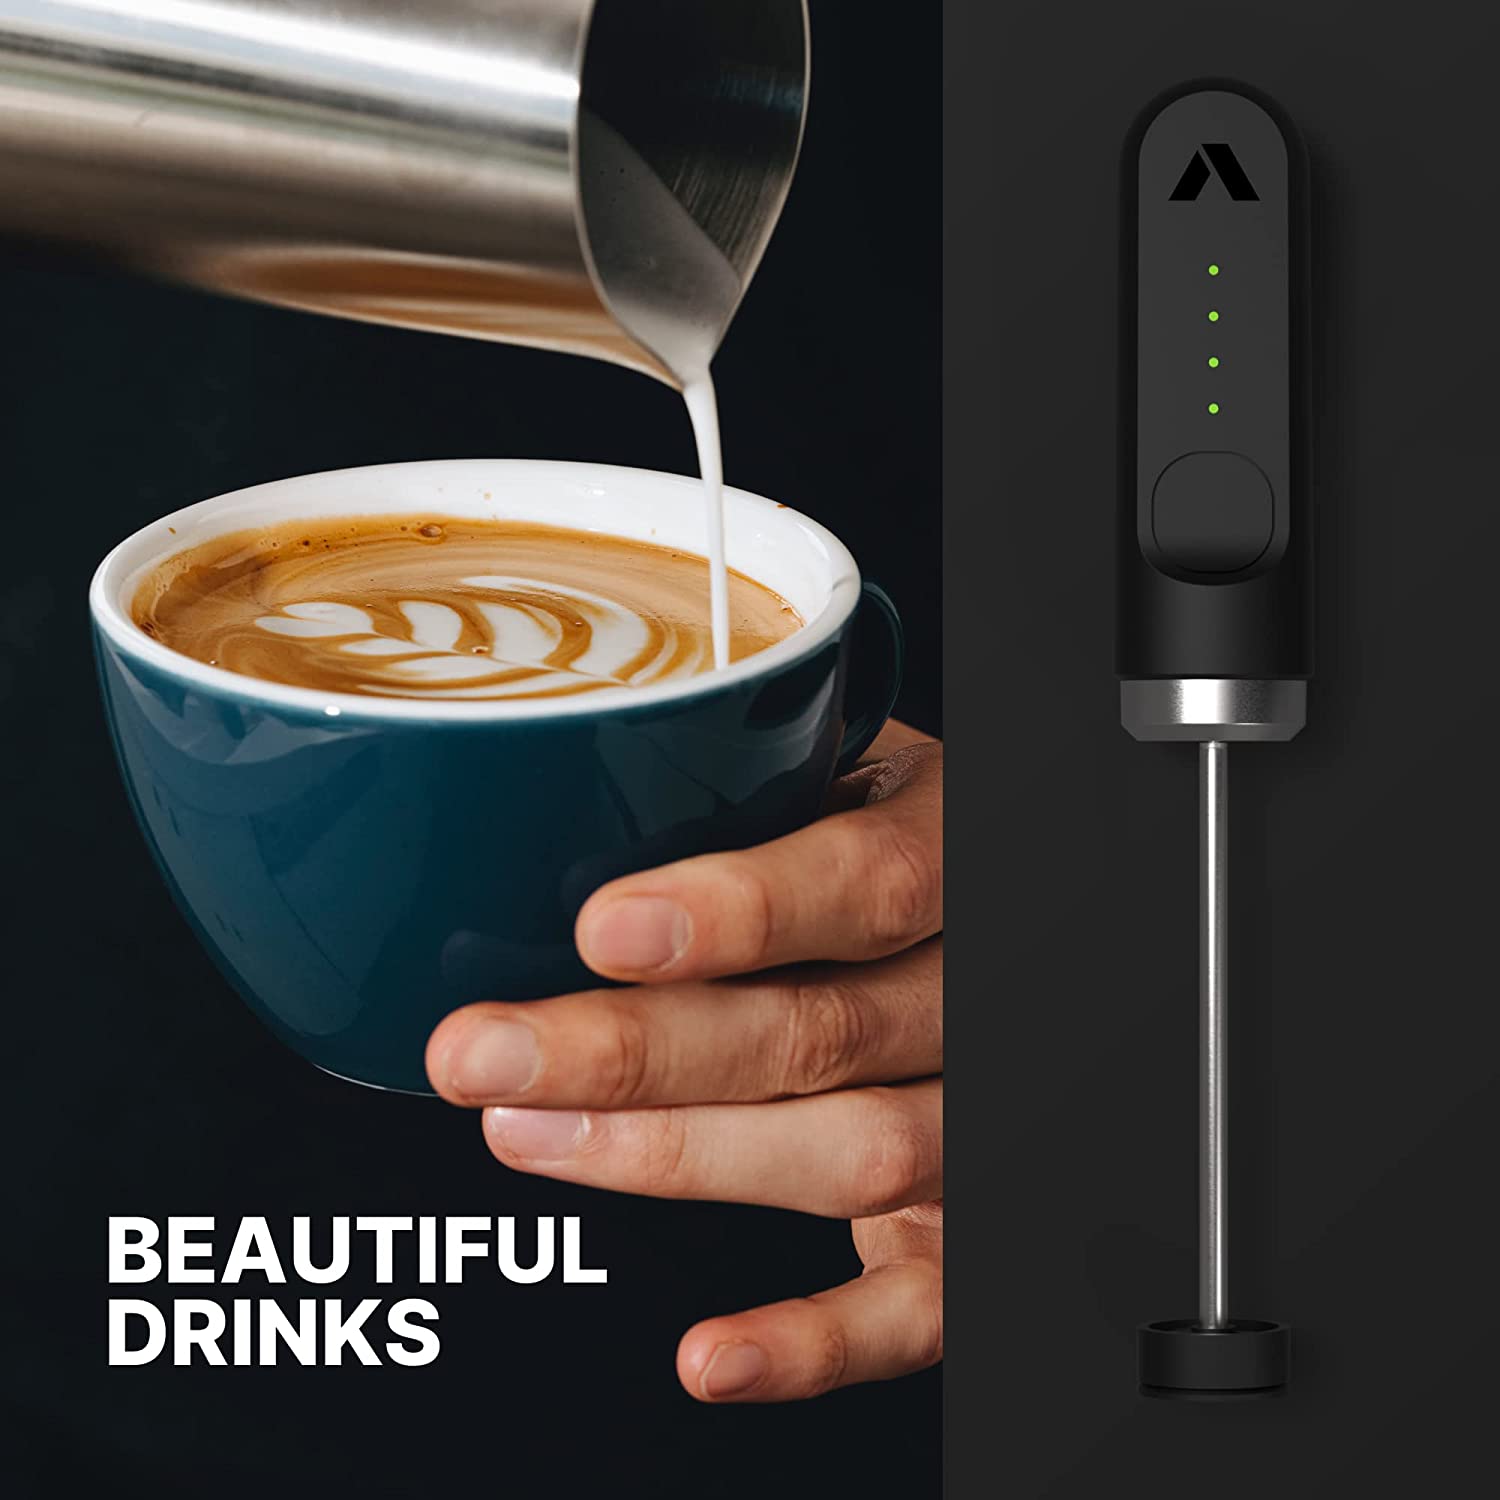 Nanofoamer Lithium Handheld Milk Foamer | Make Premium Barista-Style Coffee Drinks at Home | Rechargeable Foamer for Cappuccino, Latte, Hot Chocolates and More - FoxMart™️ - Subminimal